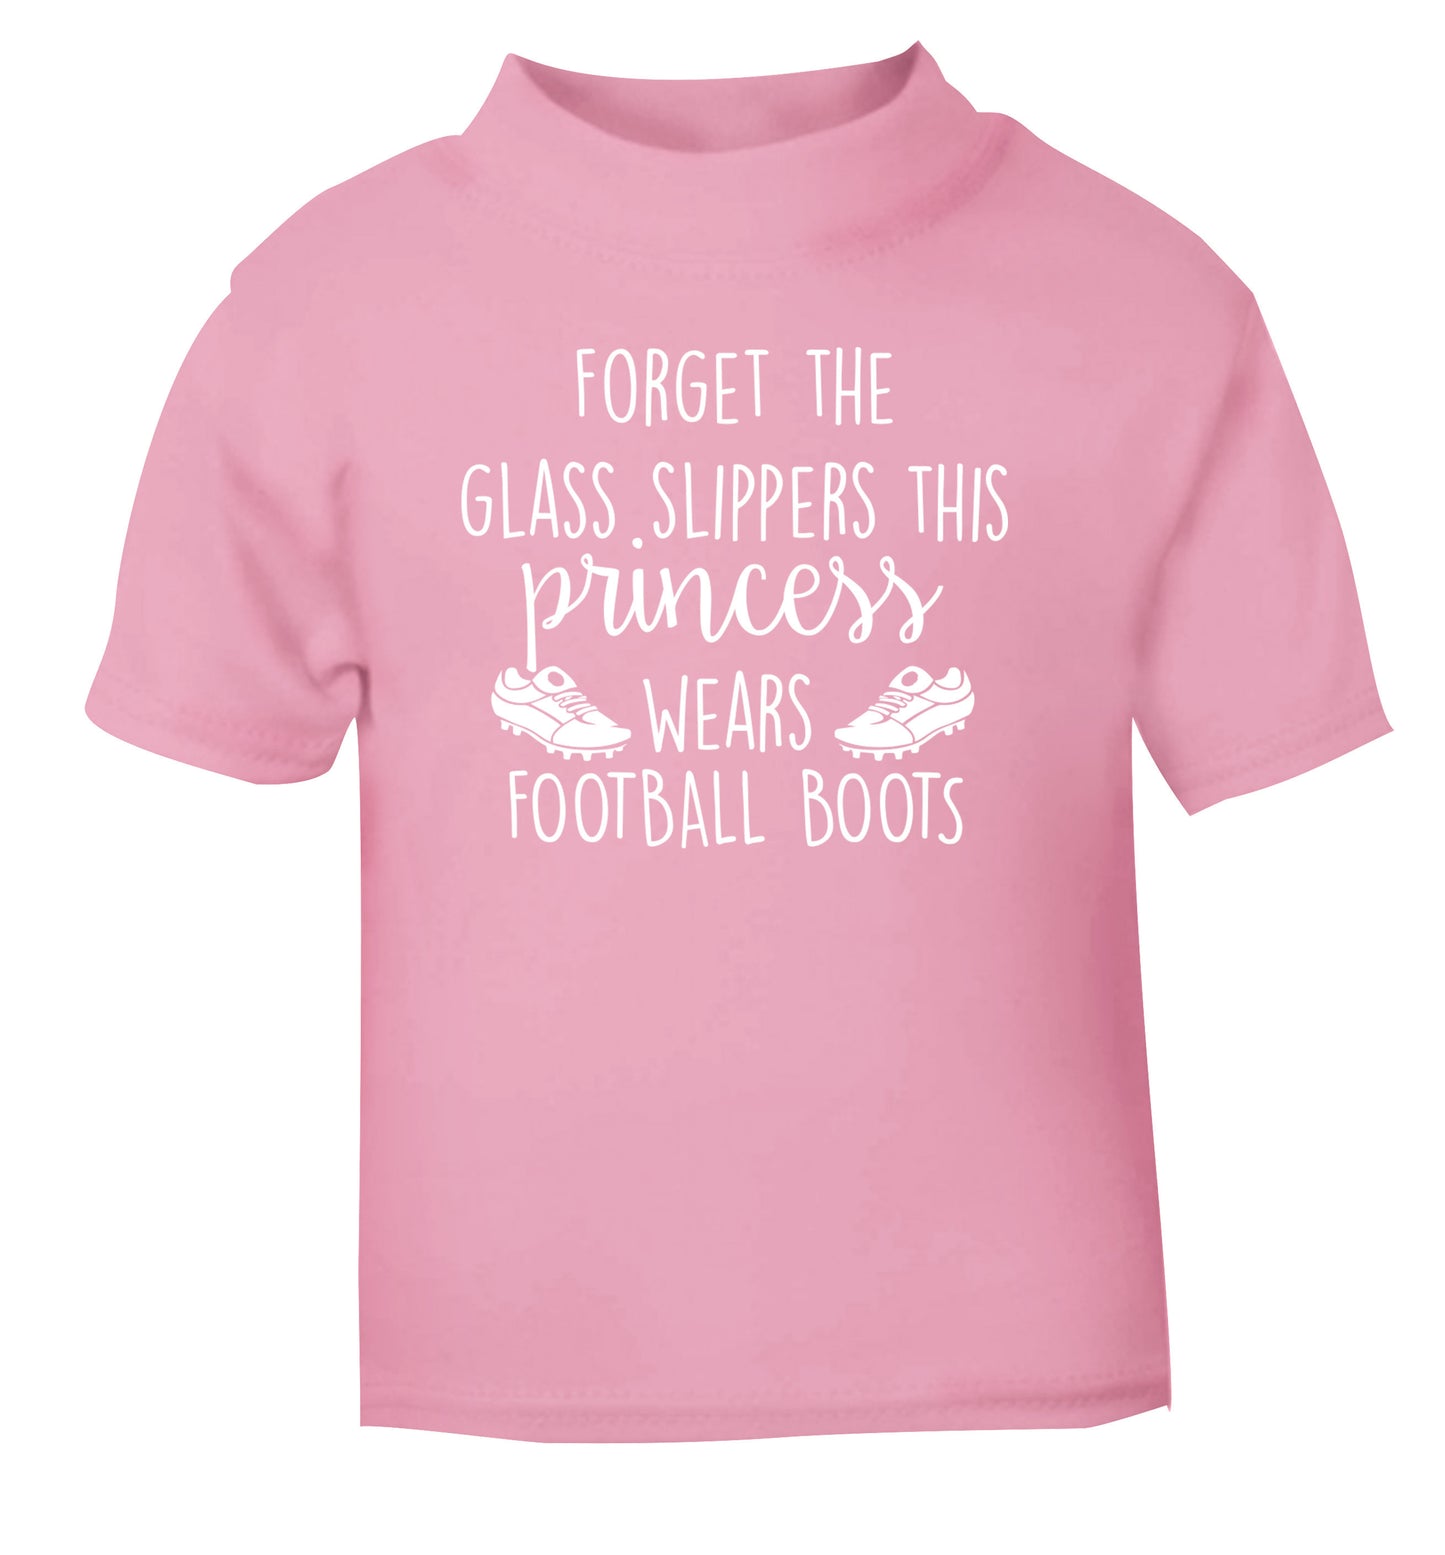 Forget the glass slippers this princess wears football boots light pink Baby Toddler Tshirt 2 Years